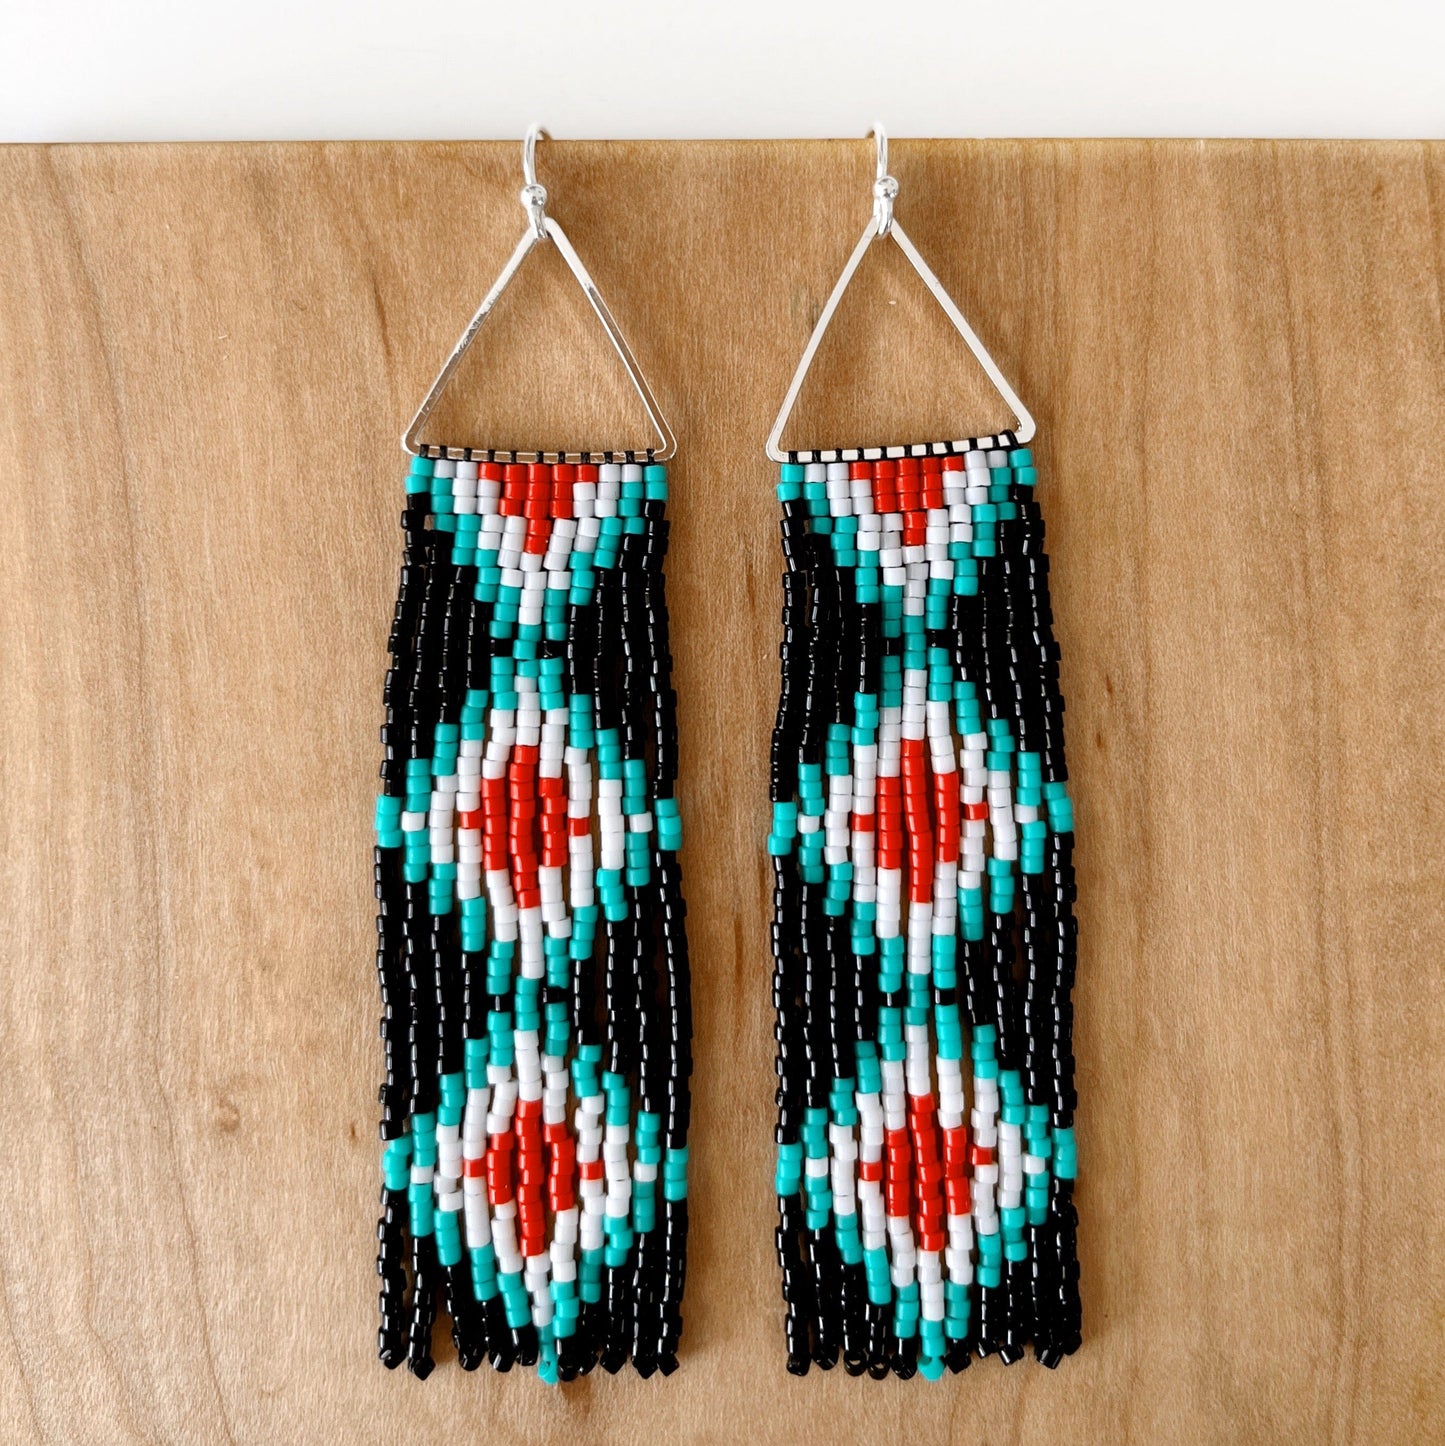 Lillie Nell Sinti Tuklo Earrings in Tradition